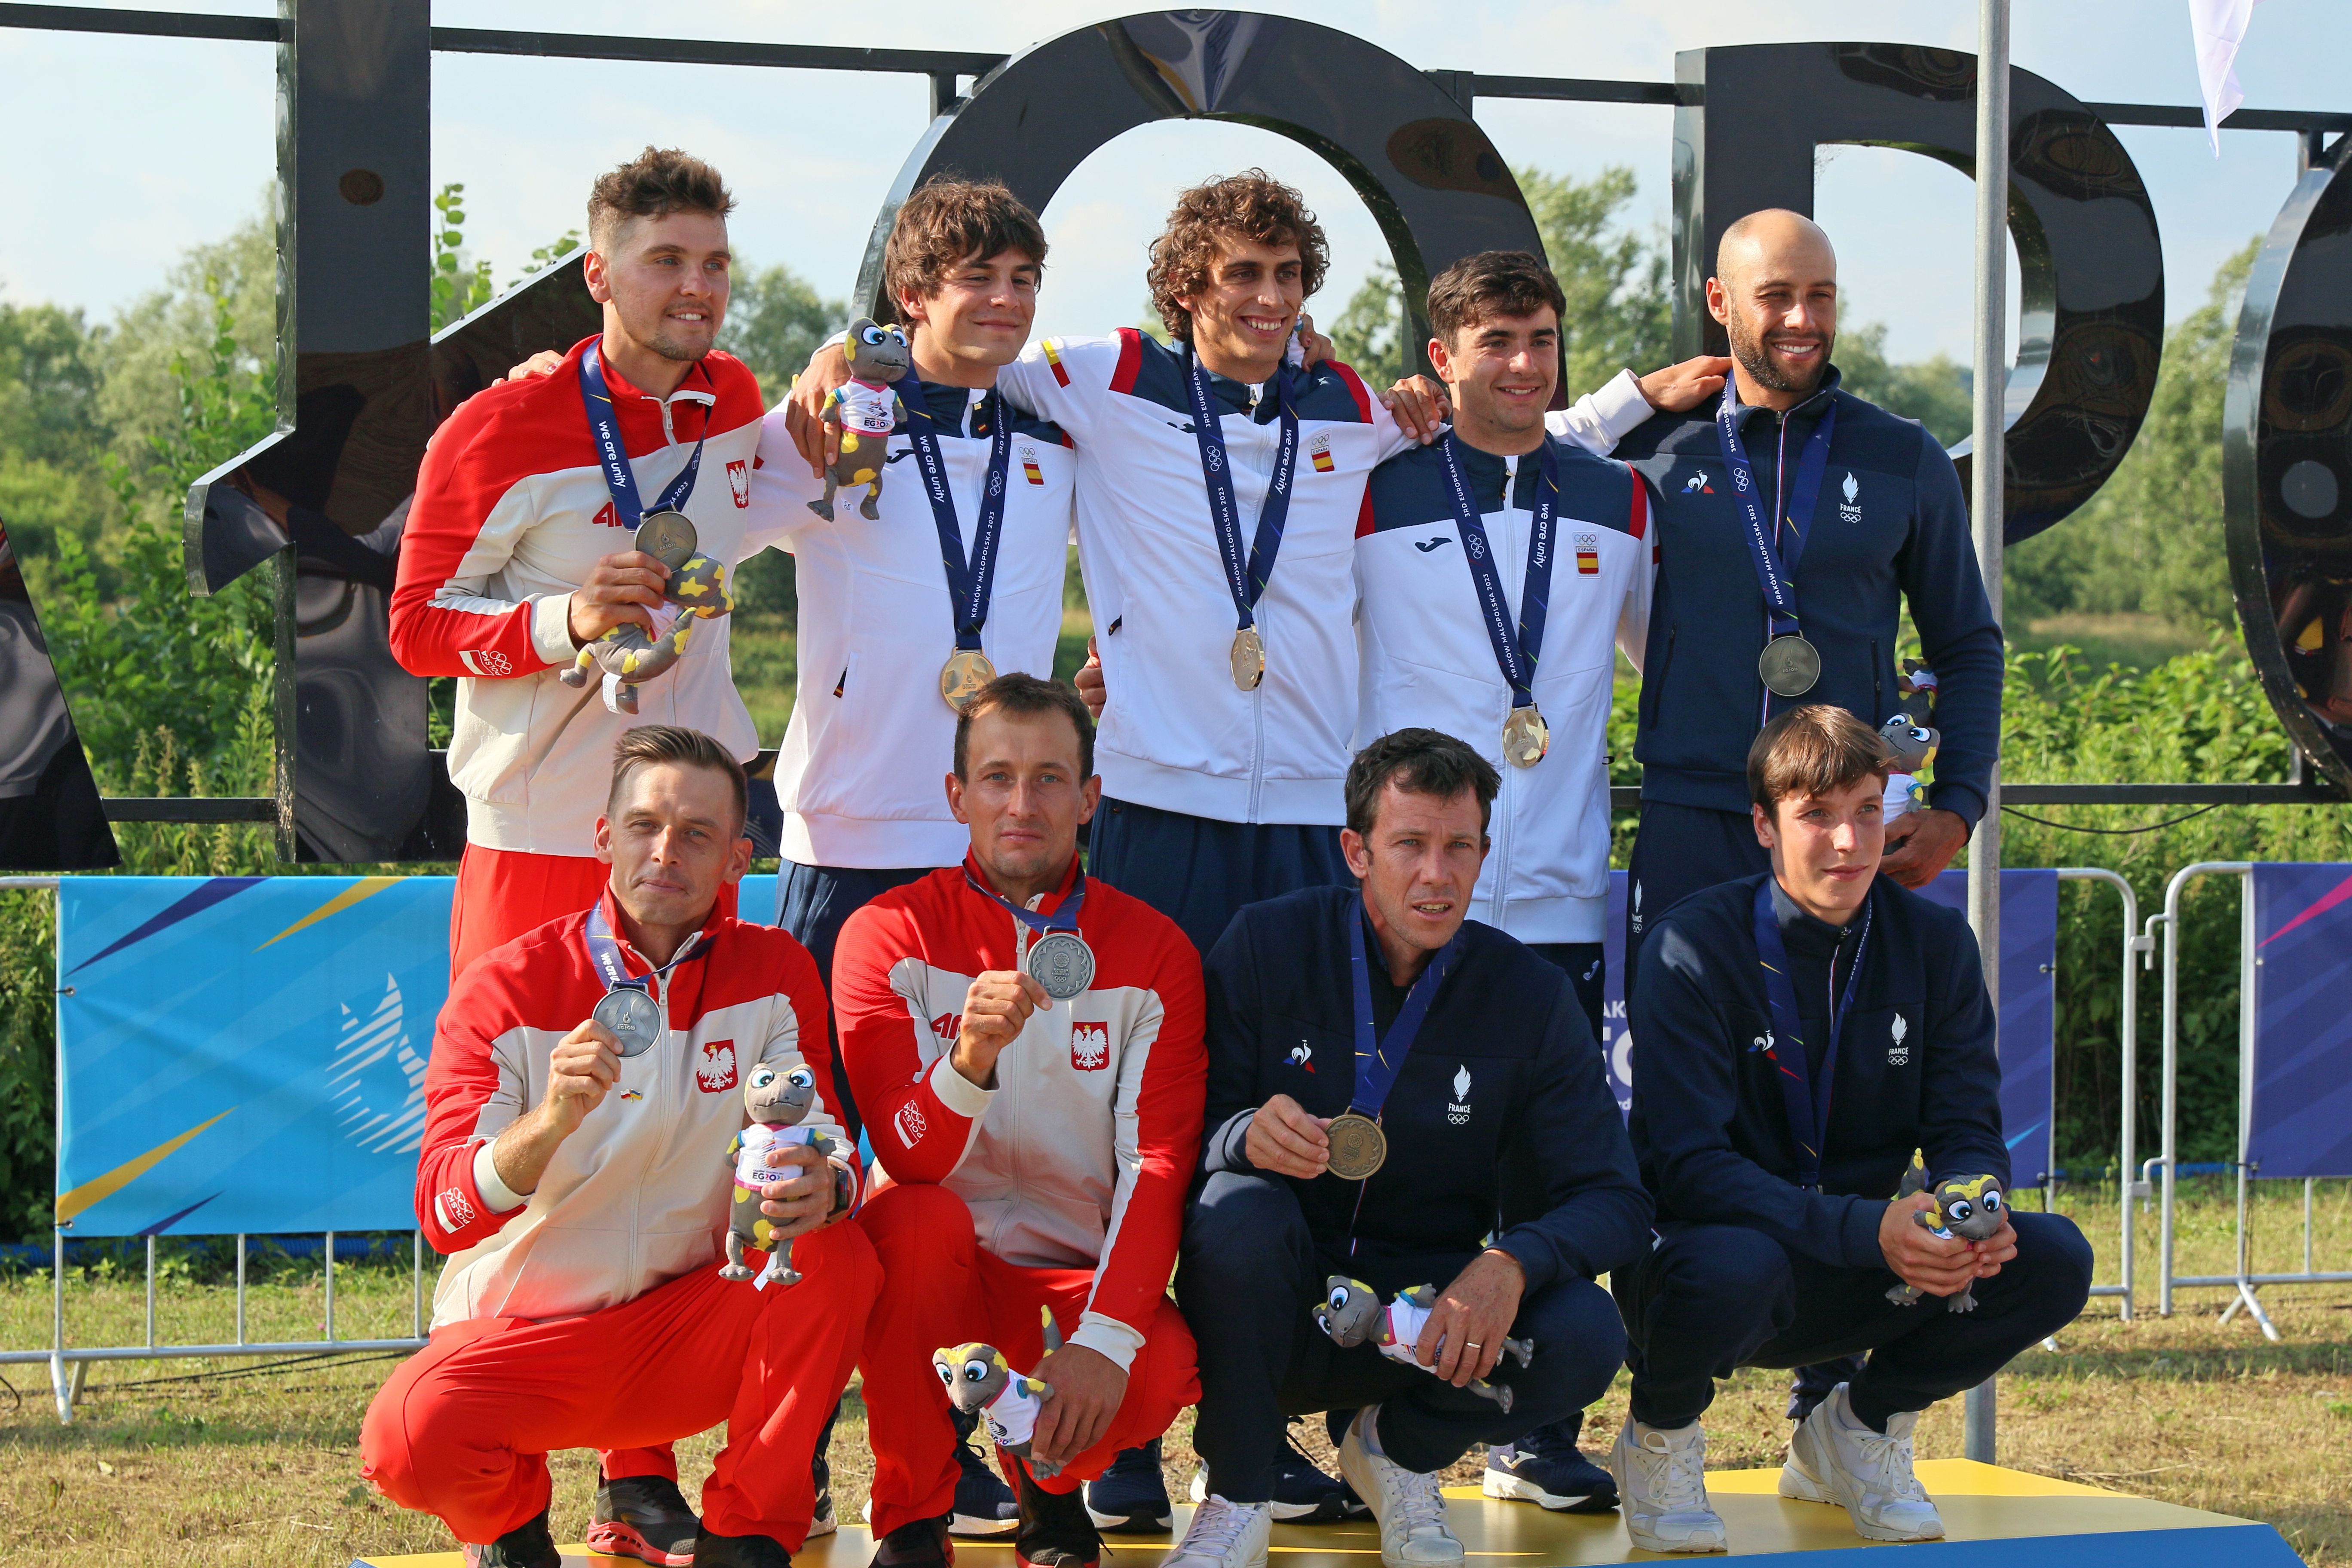 First ever canoe slalom gold medals at European Games to Spain and France